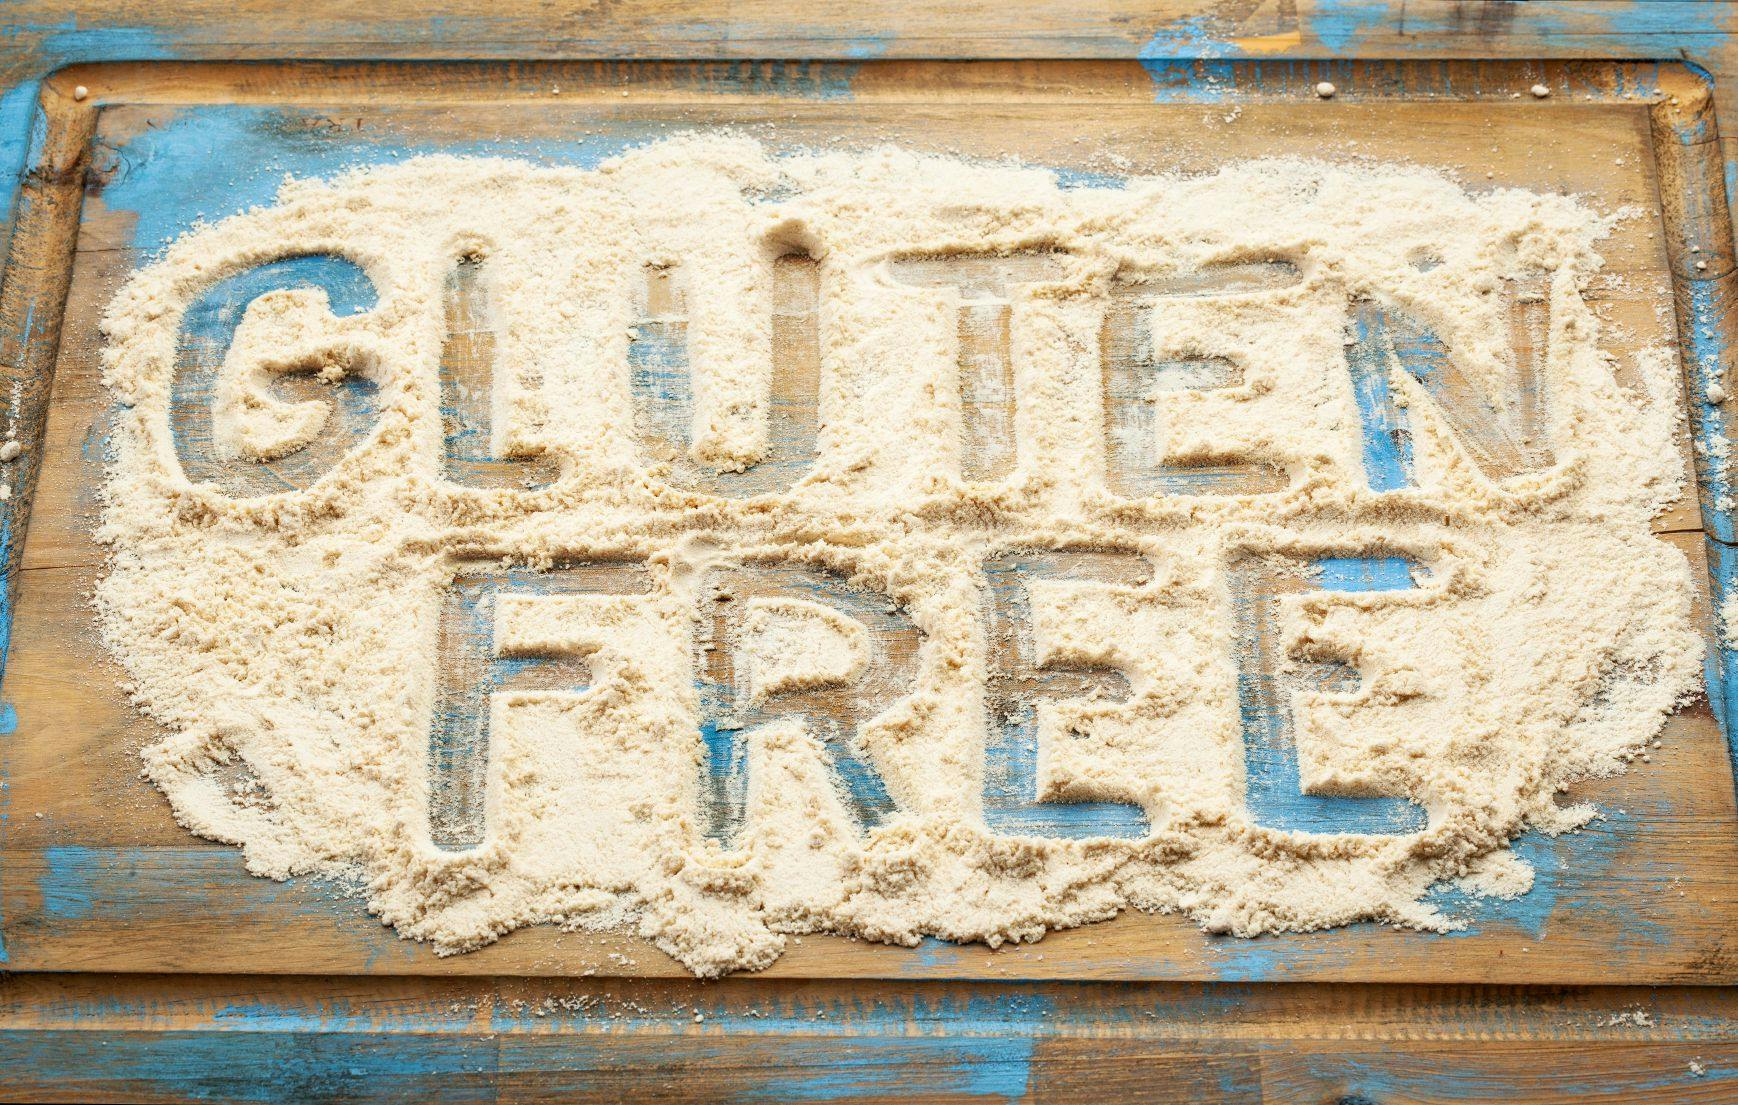 Gluten-Degrading Enzyme Helps Those Who Are Gluten-Sensitive